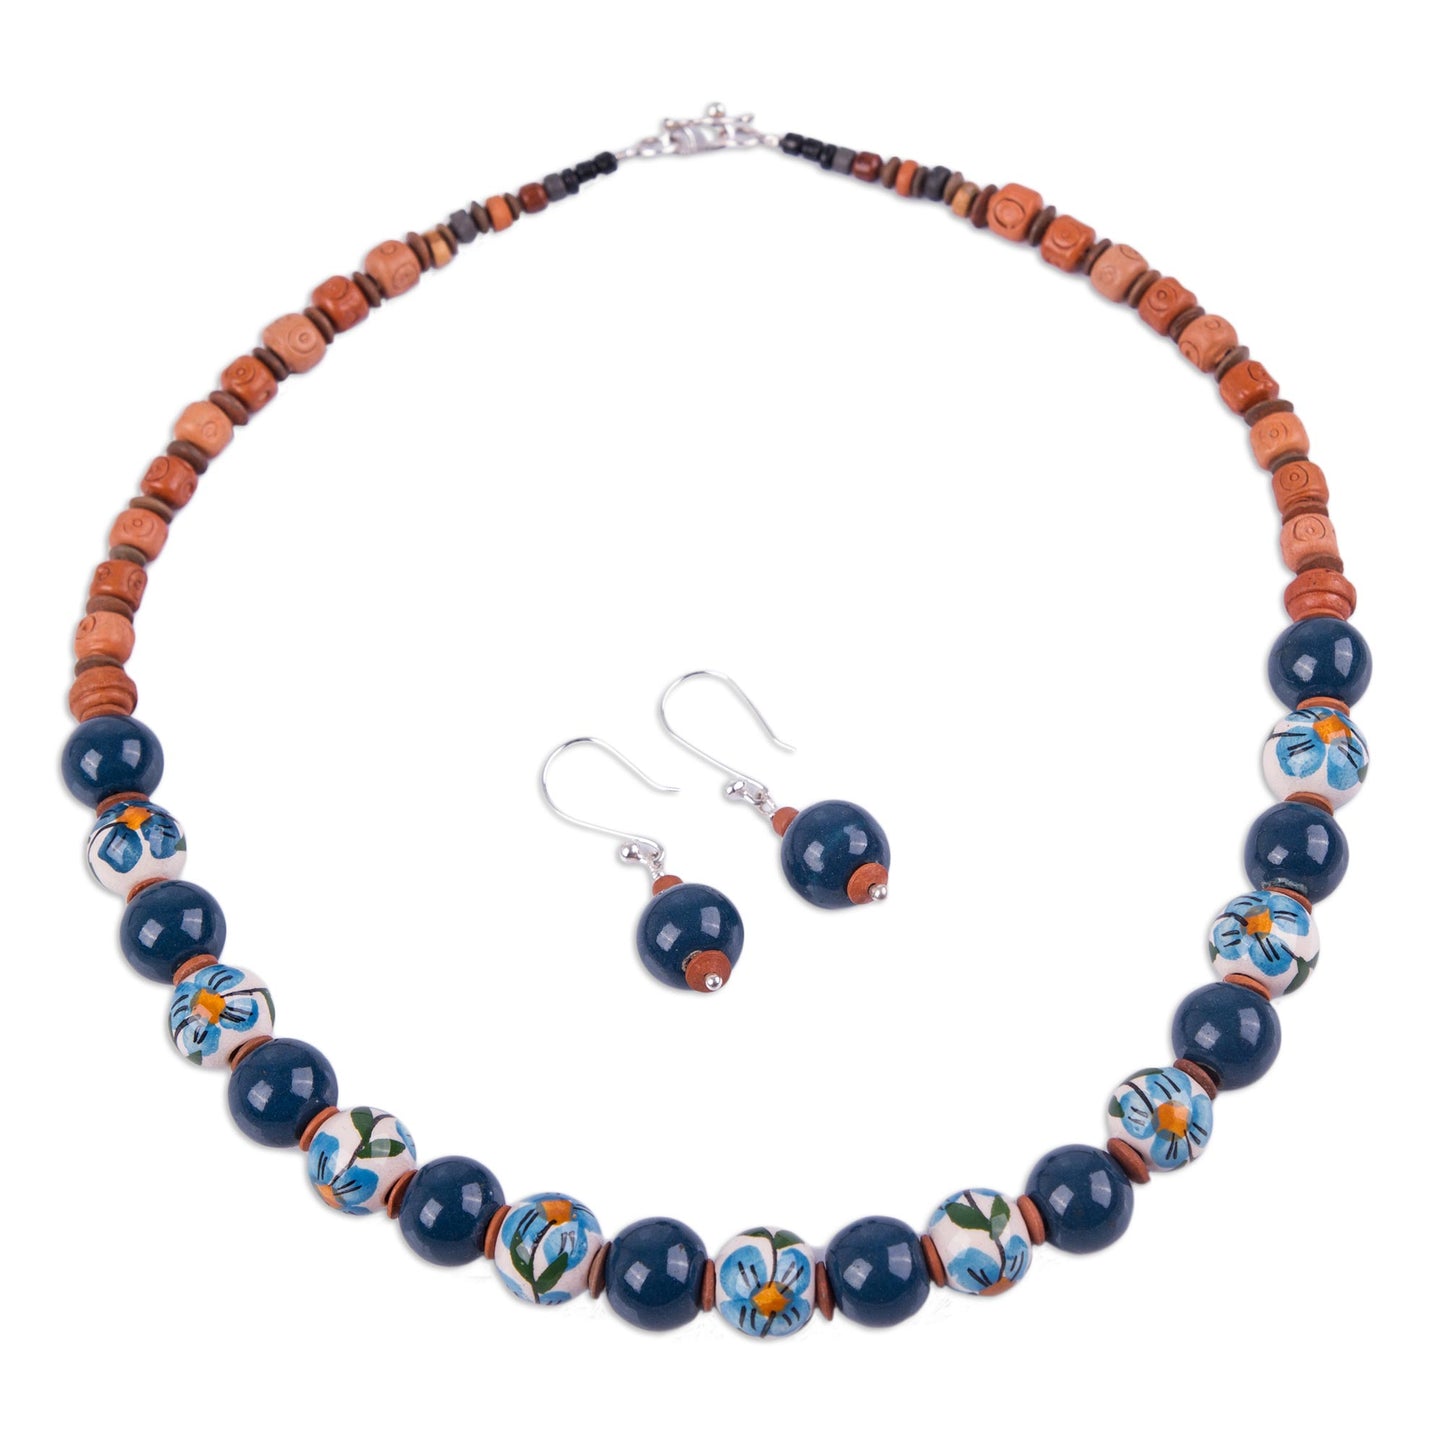 Precious Blue Jewelry Set with Hand Painted Flowers on Ceramic Beads